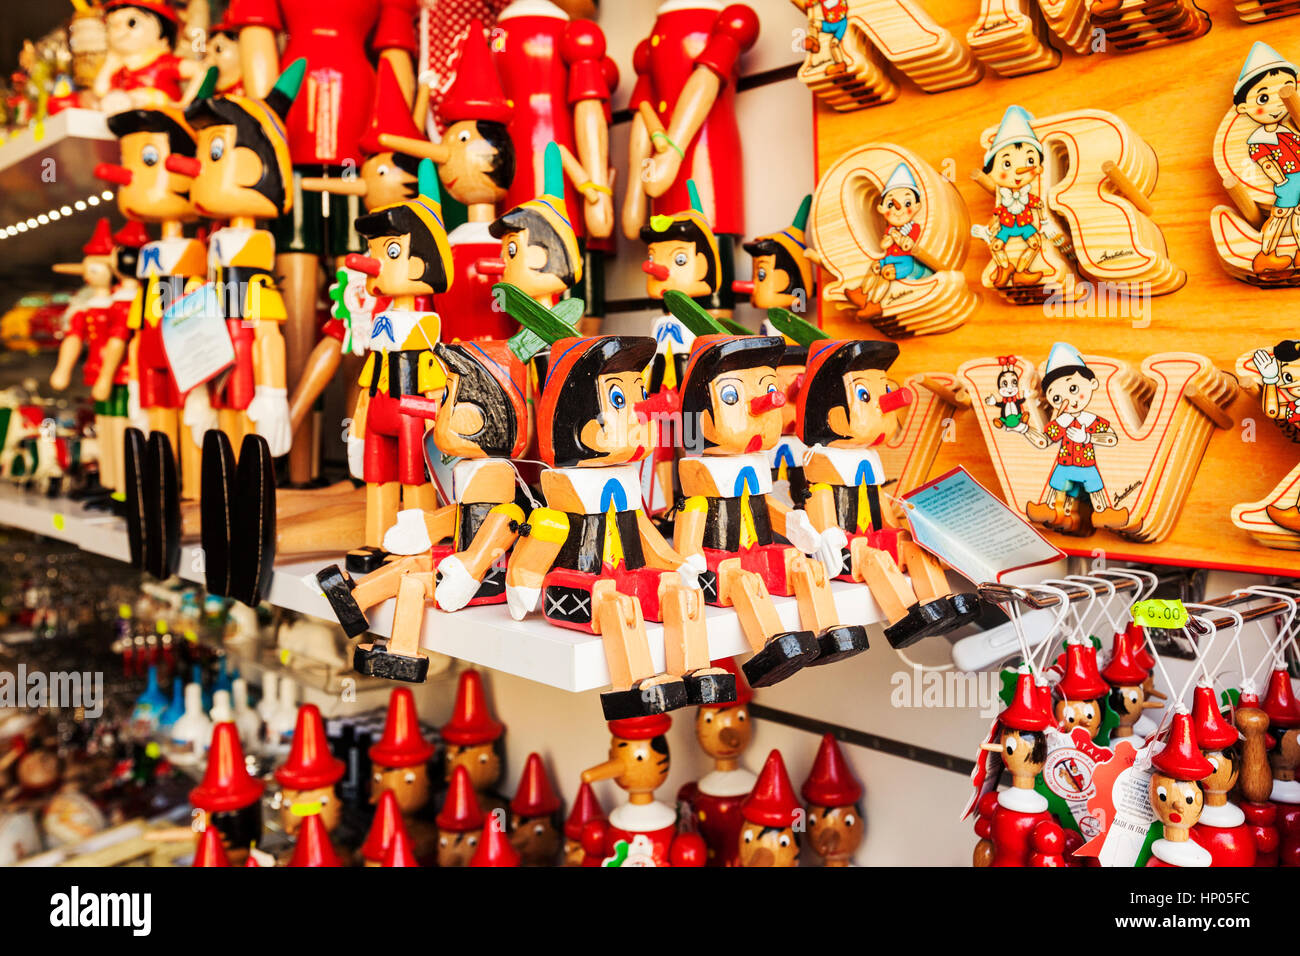 Pinocchio puppet wooden souvenir in Tuscany shop, Italy Stock Photo